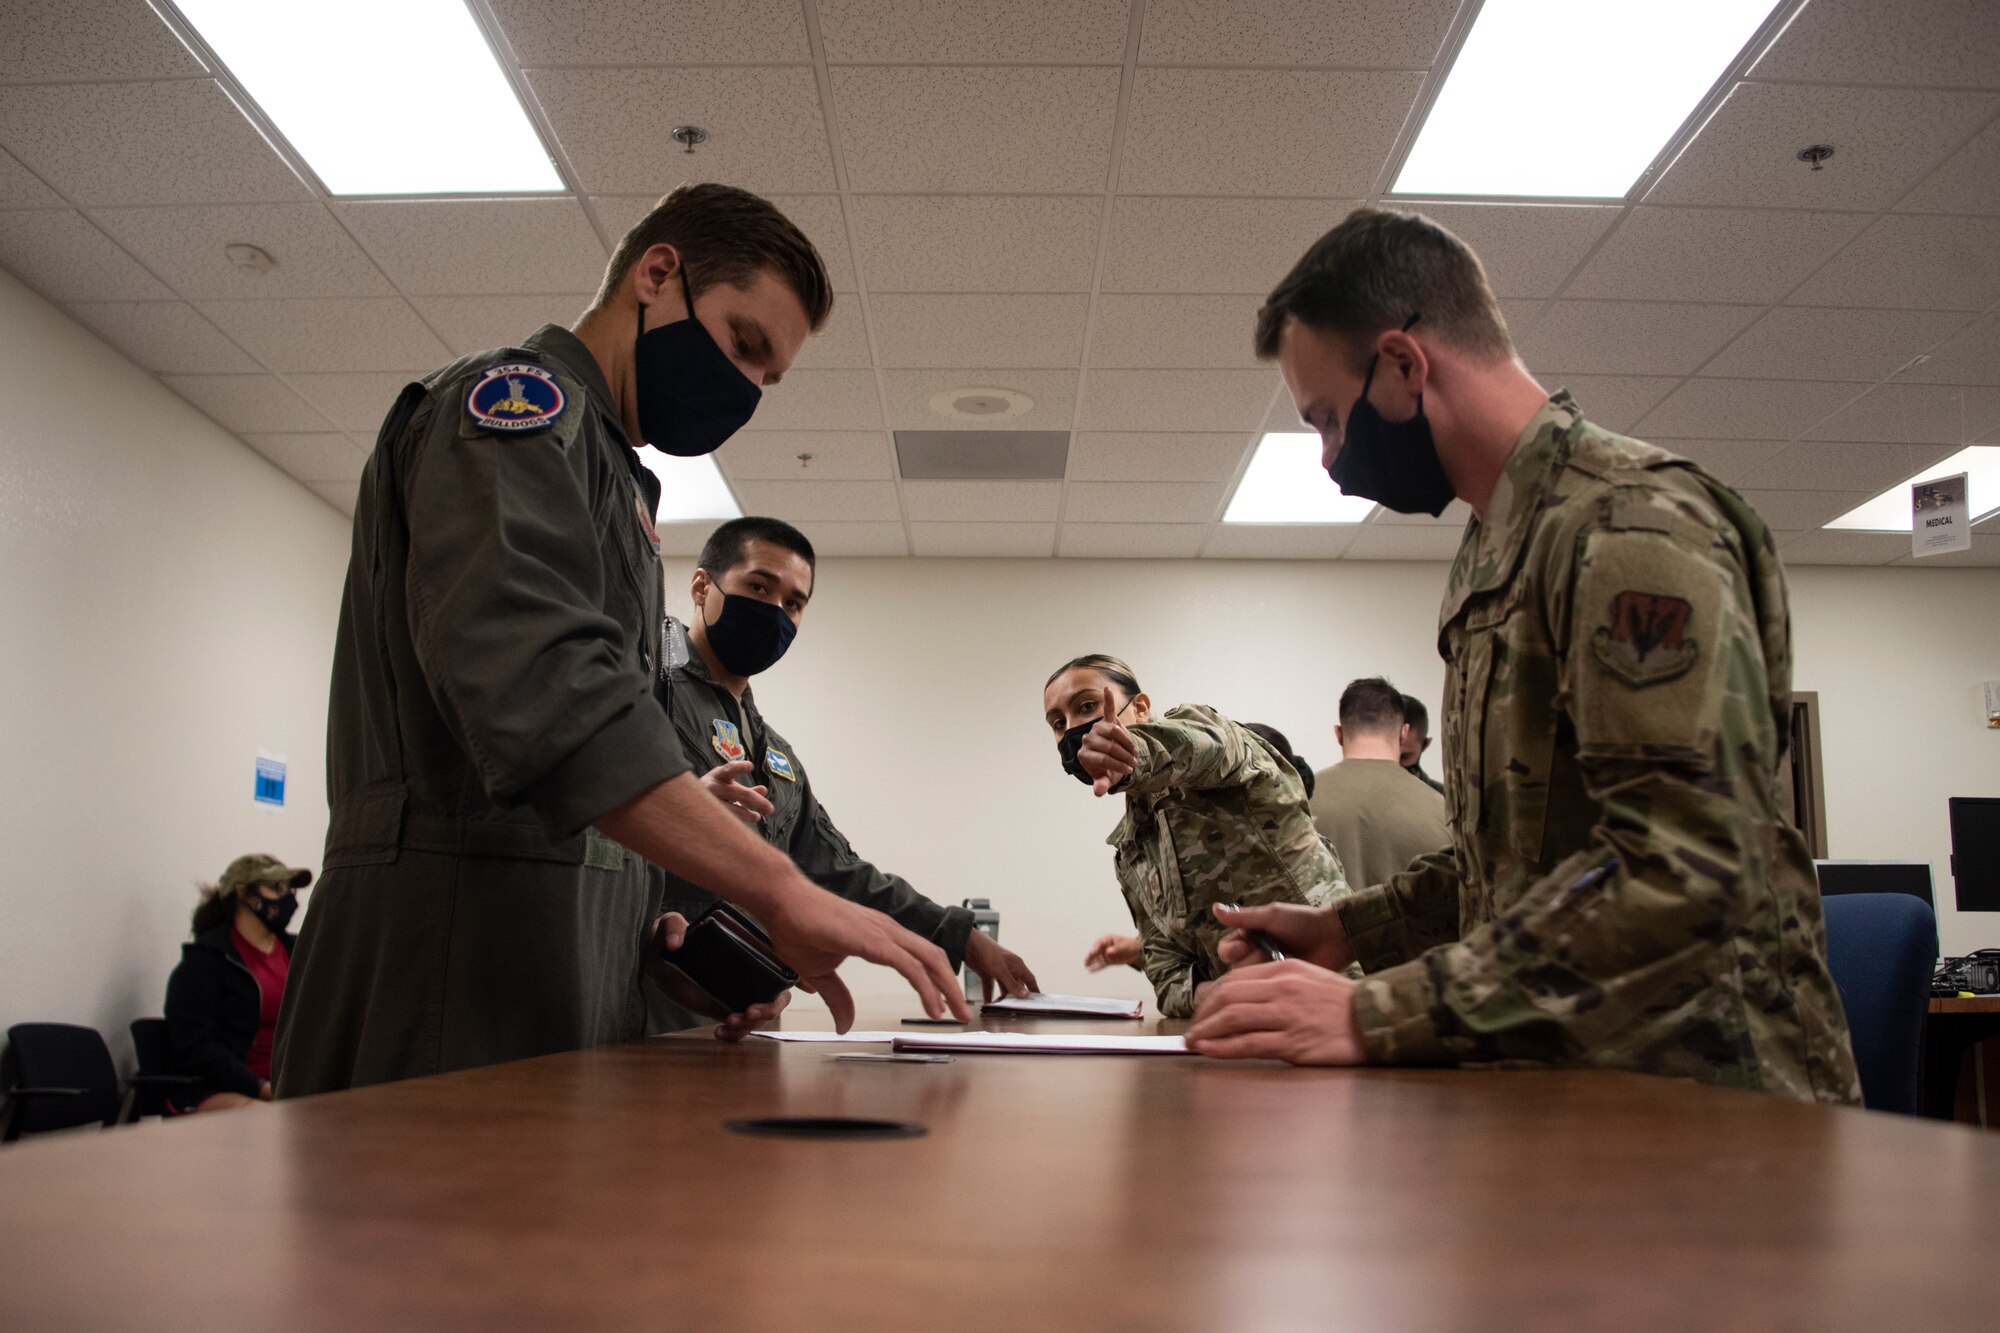 A photo of an Airman processing for an exercise